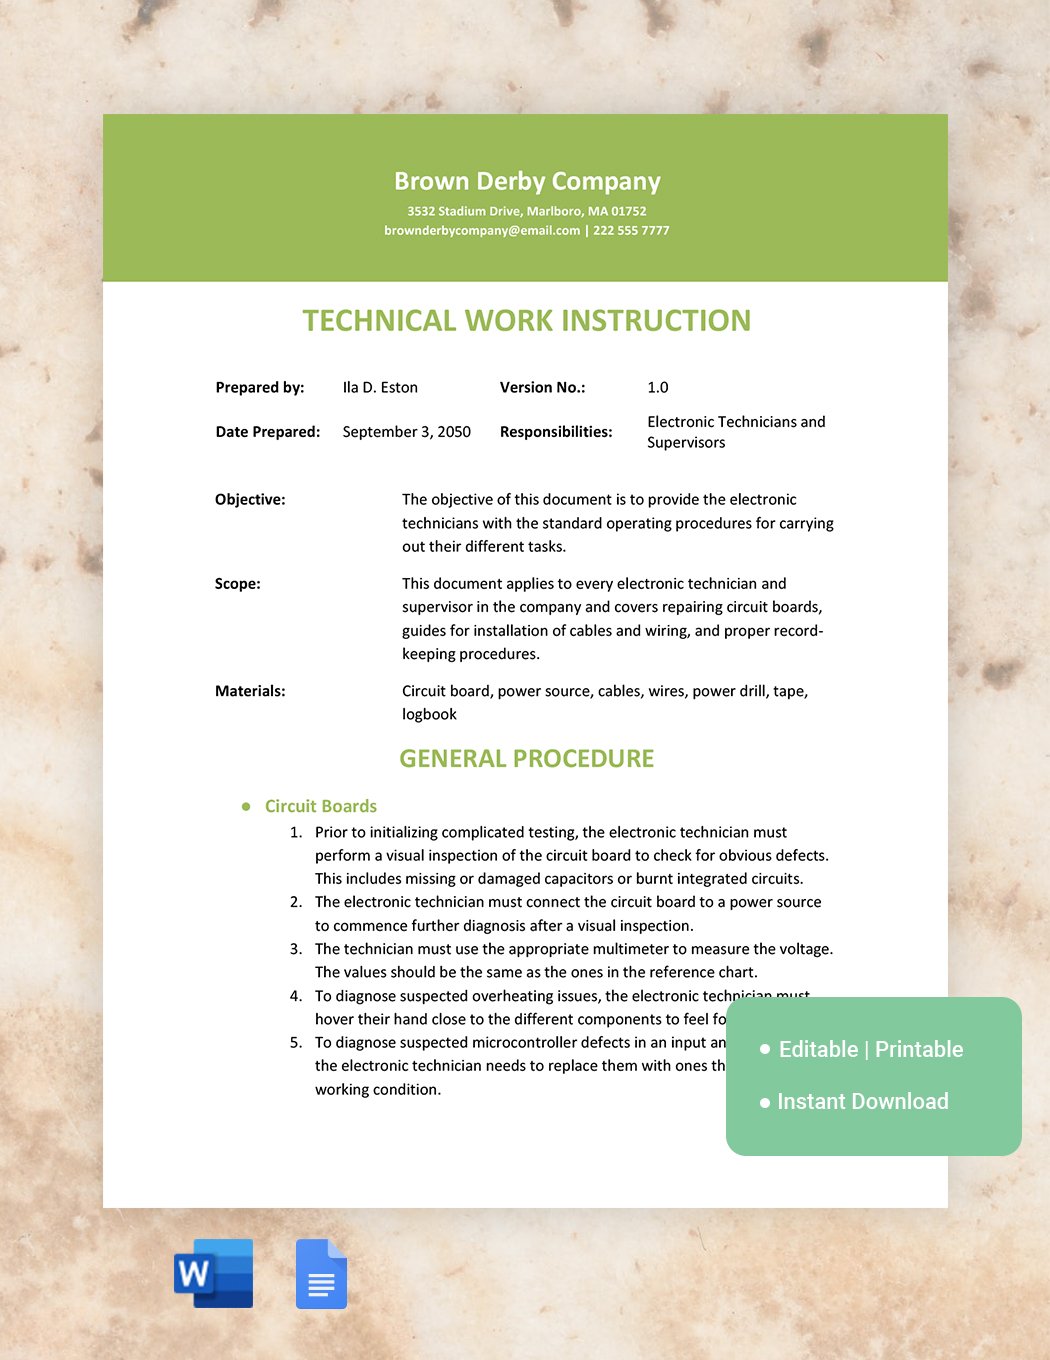 Technical Work Instruction Template in Word, Google Docs